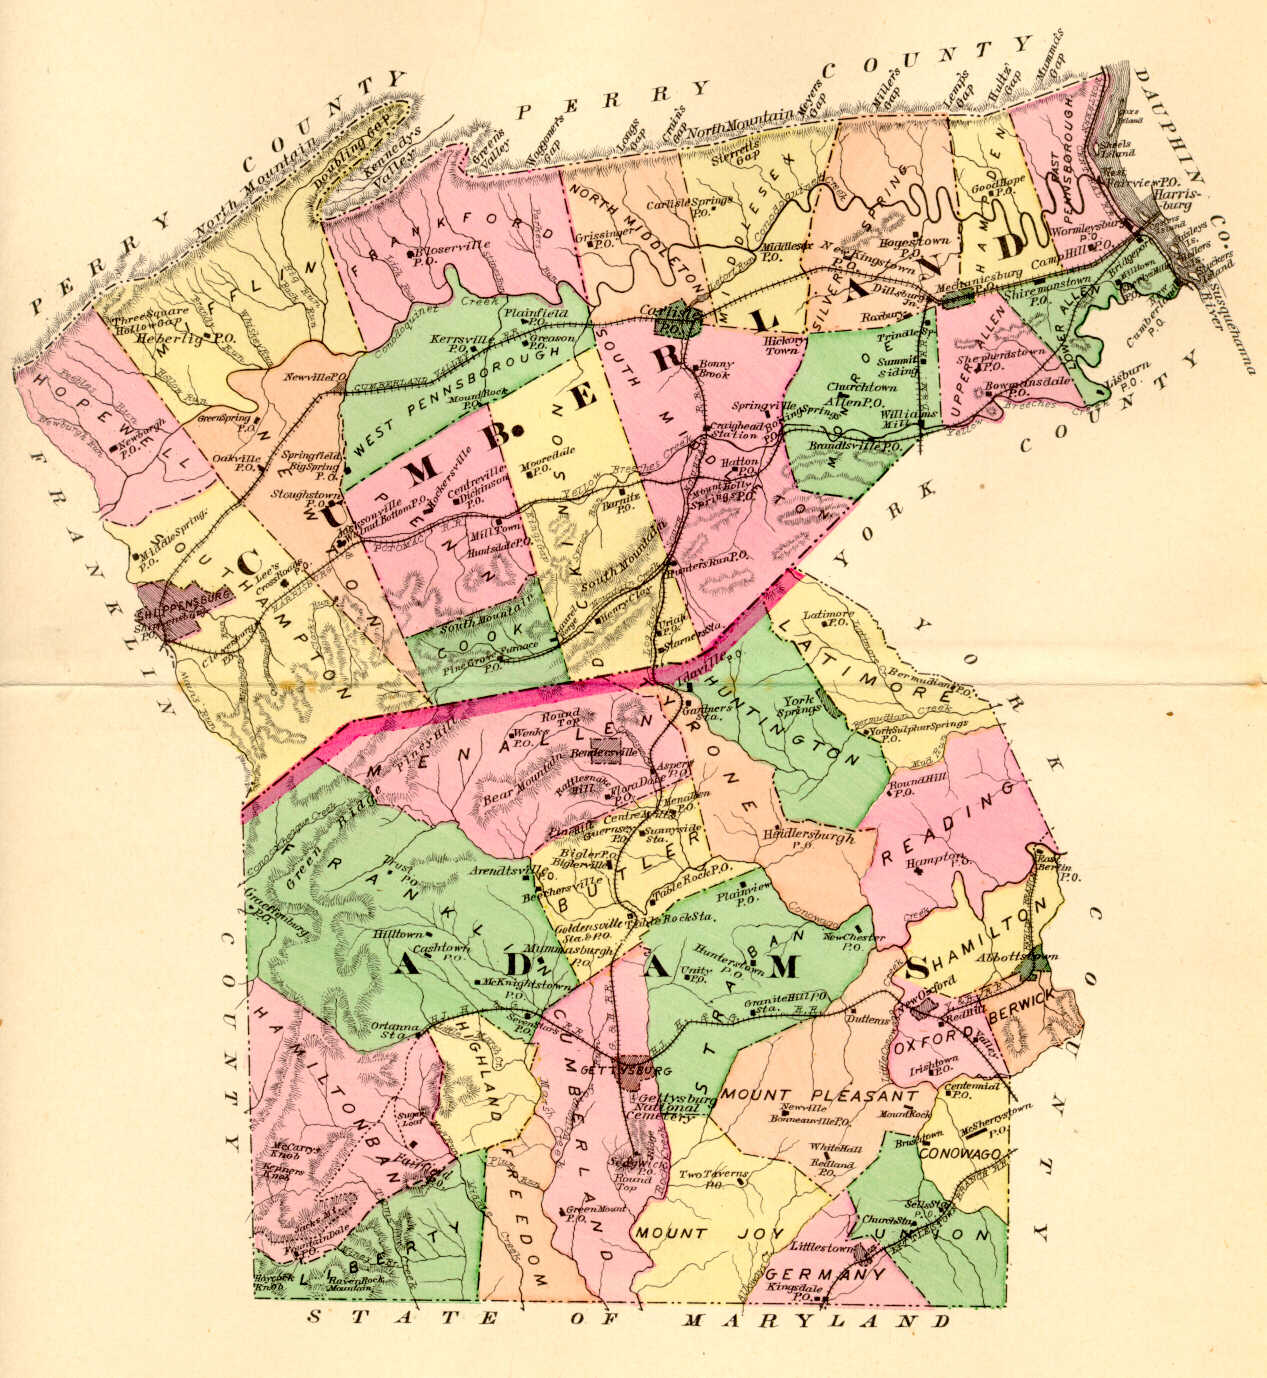 Cumberland and Adams Counties, 1886